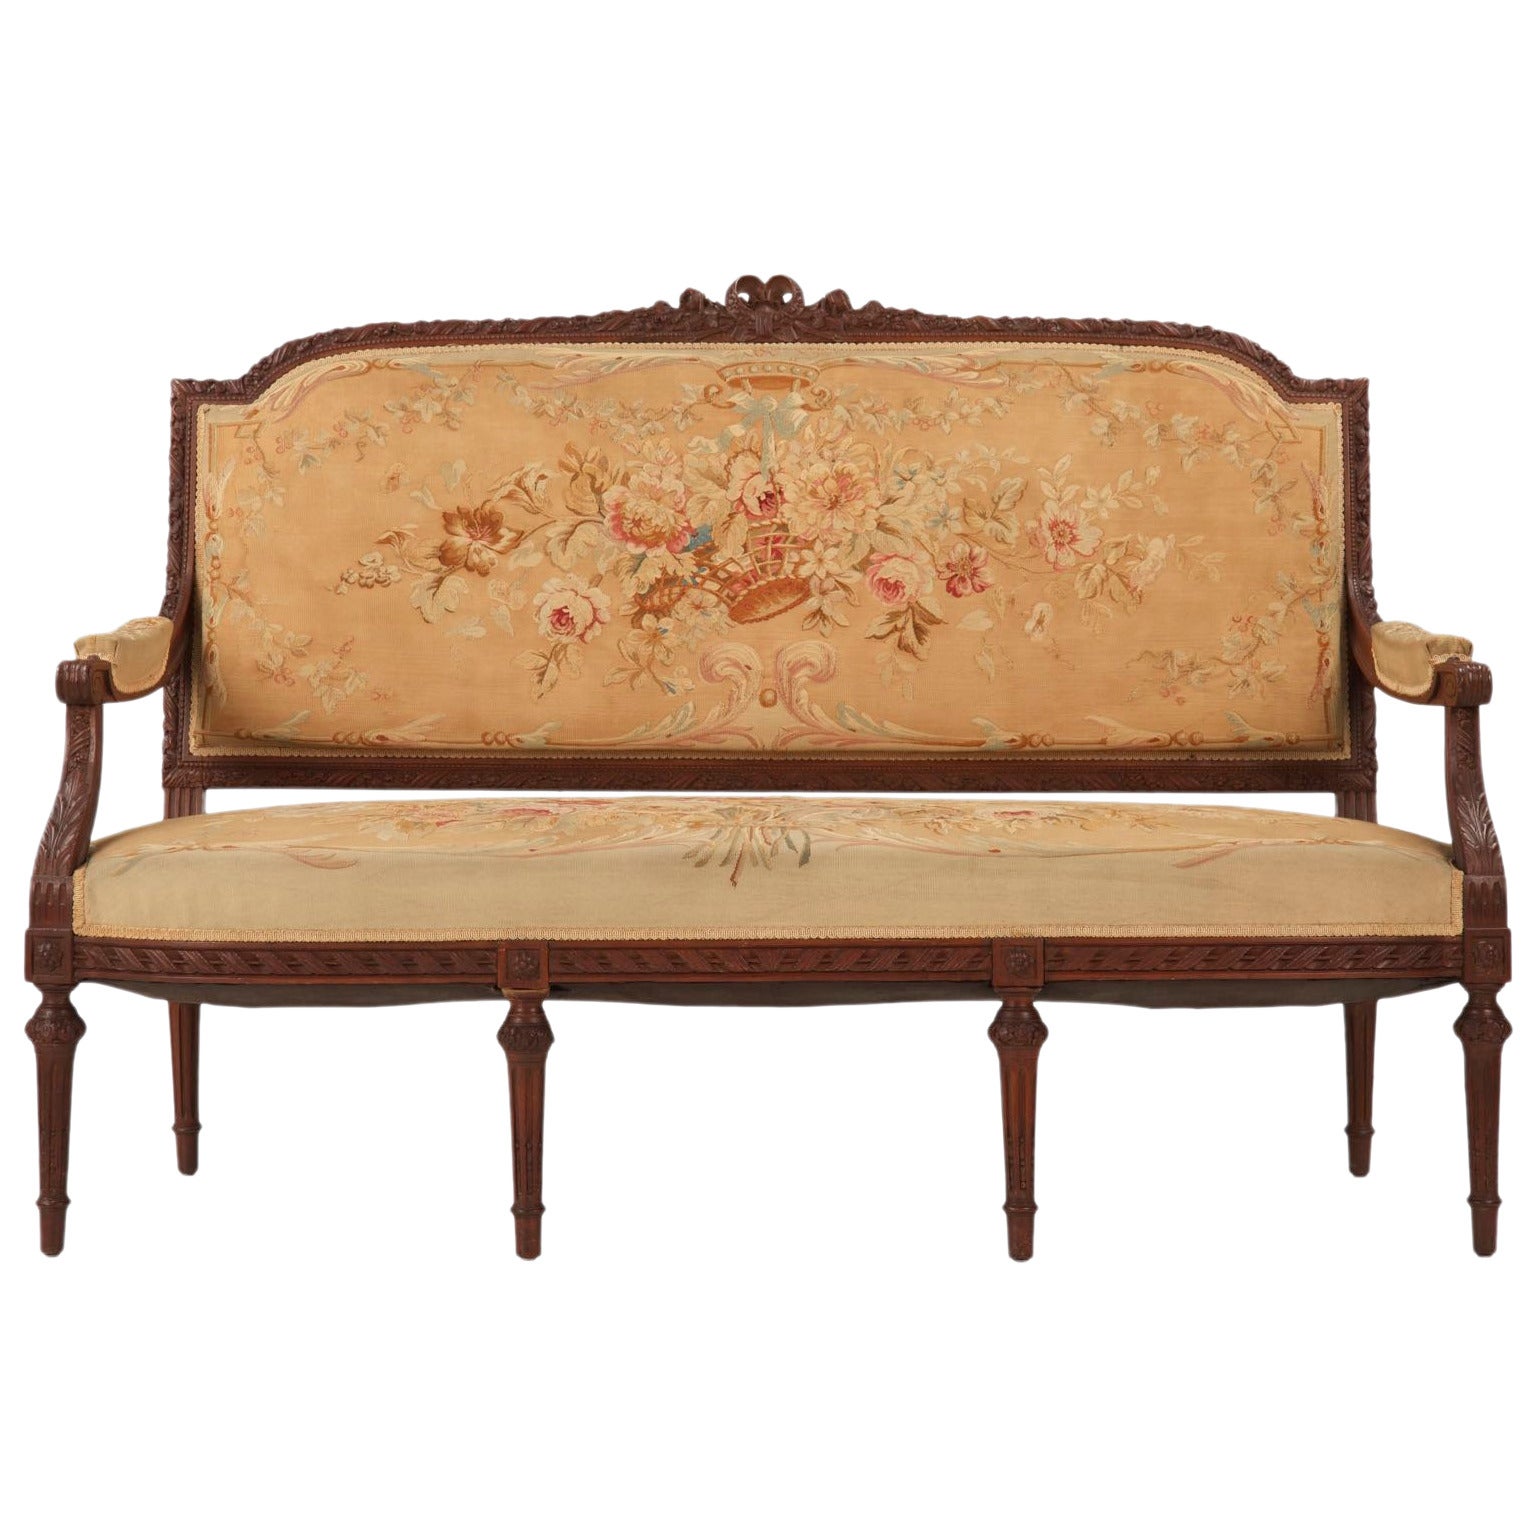 French Louis XVI Style Settee w/ Original Aubusson Covering, 19th Century